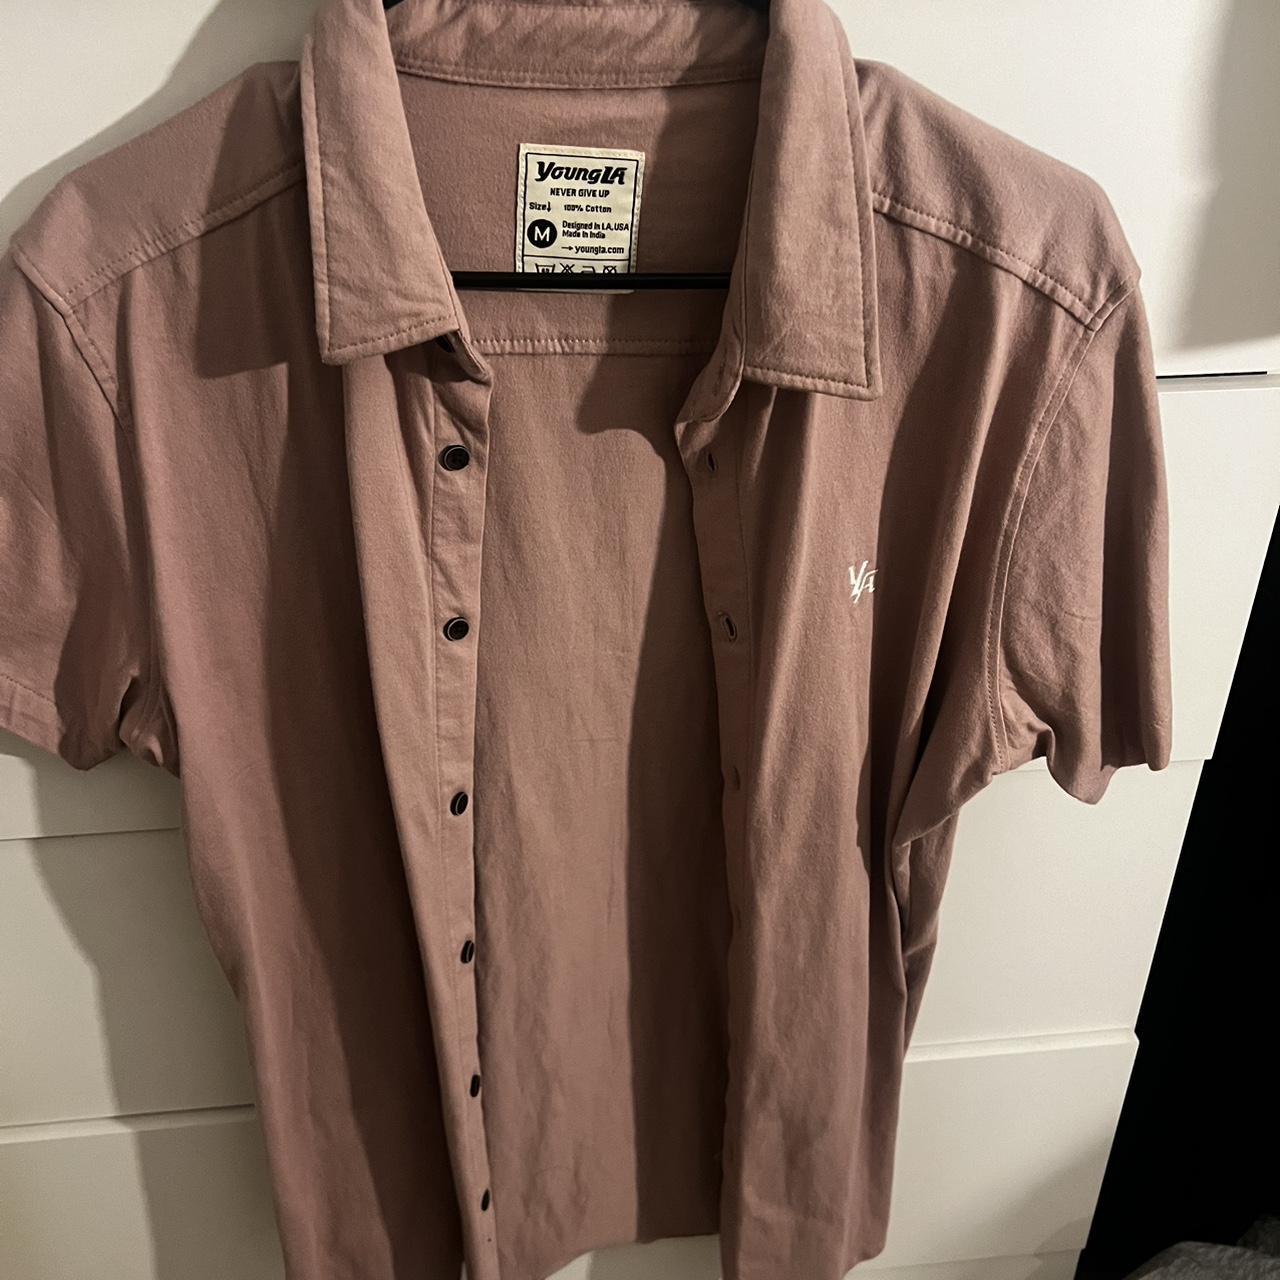 Youngla fit shirt! Great for casual wear - Depop